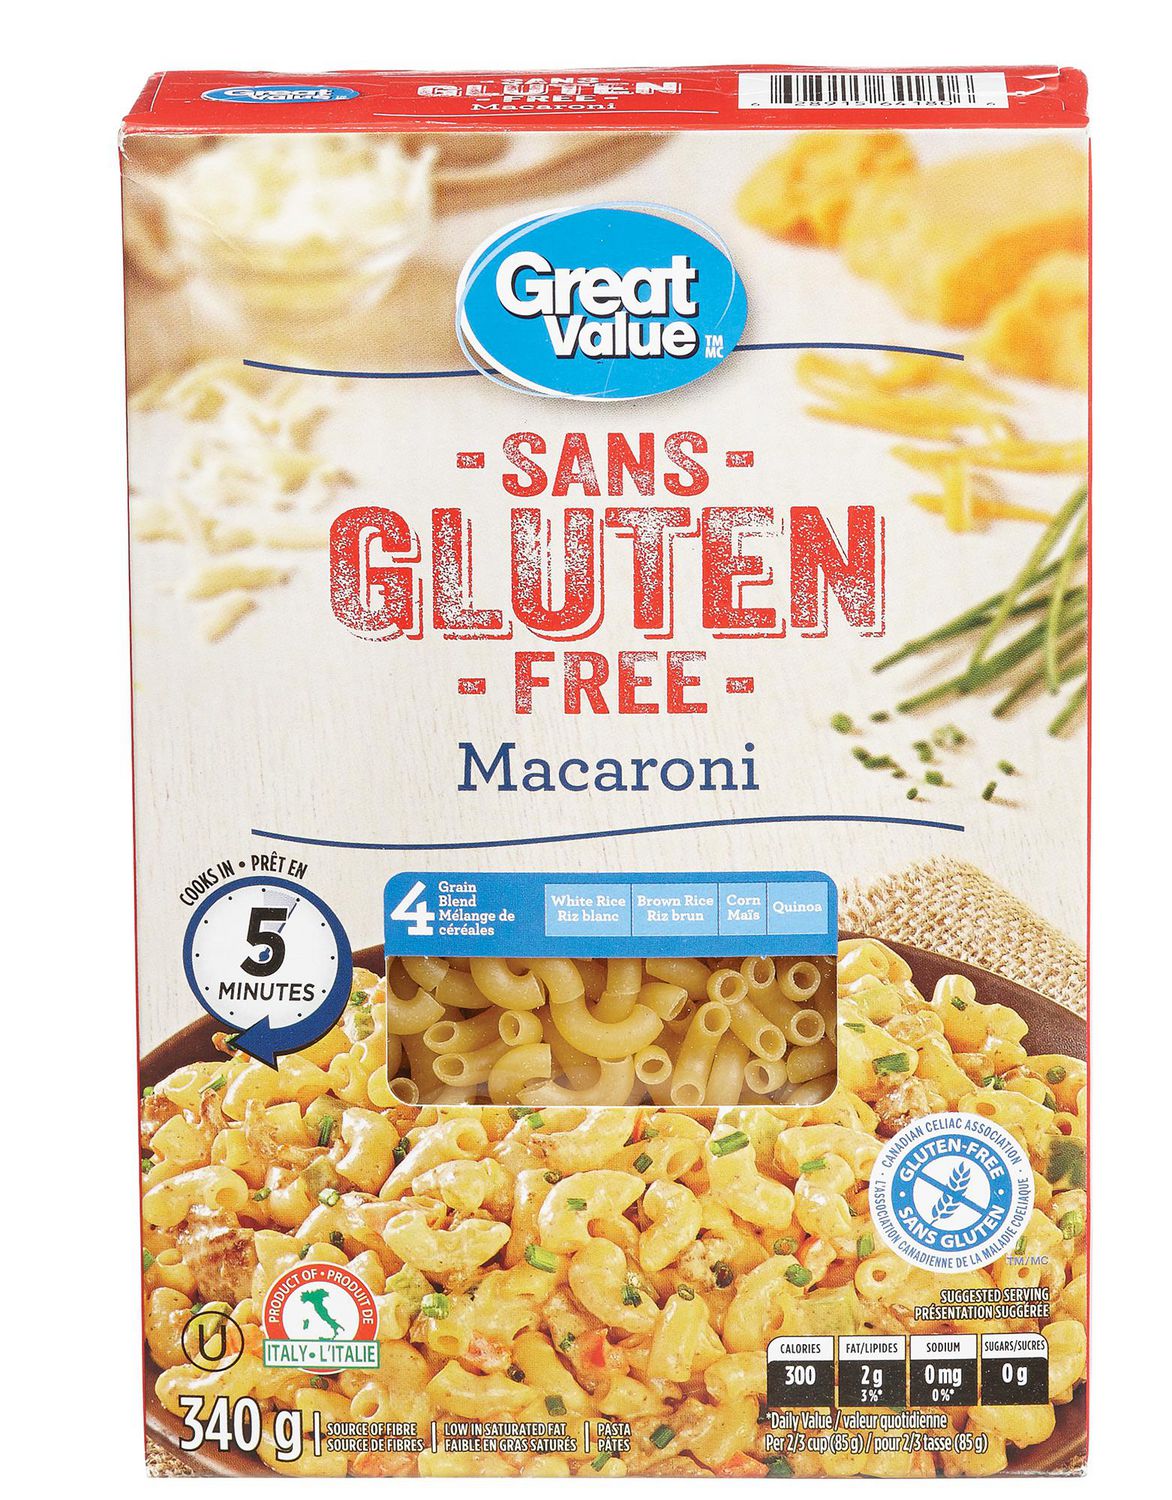 calories in great value gluten free macaroni and cheese